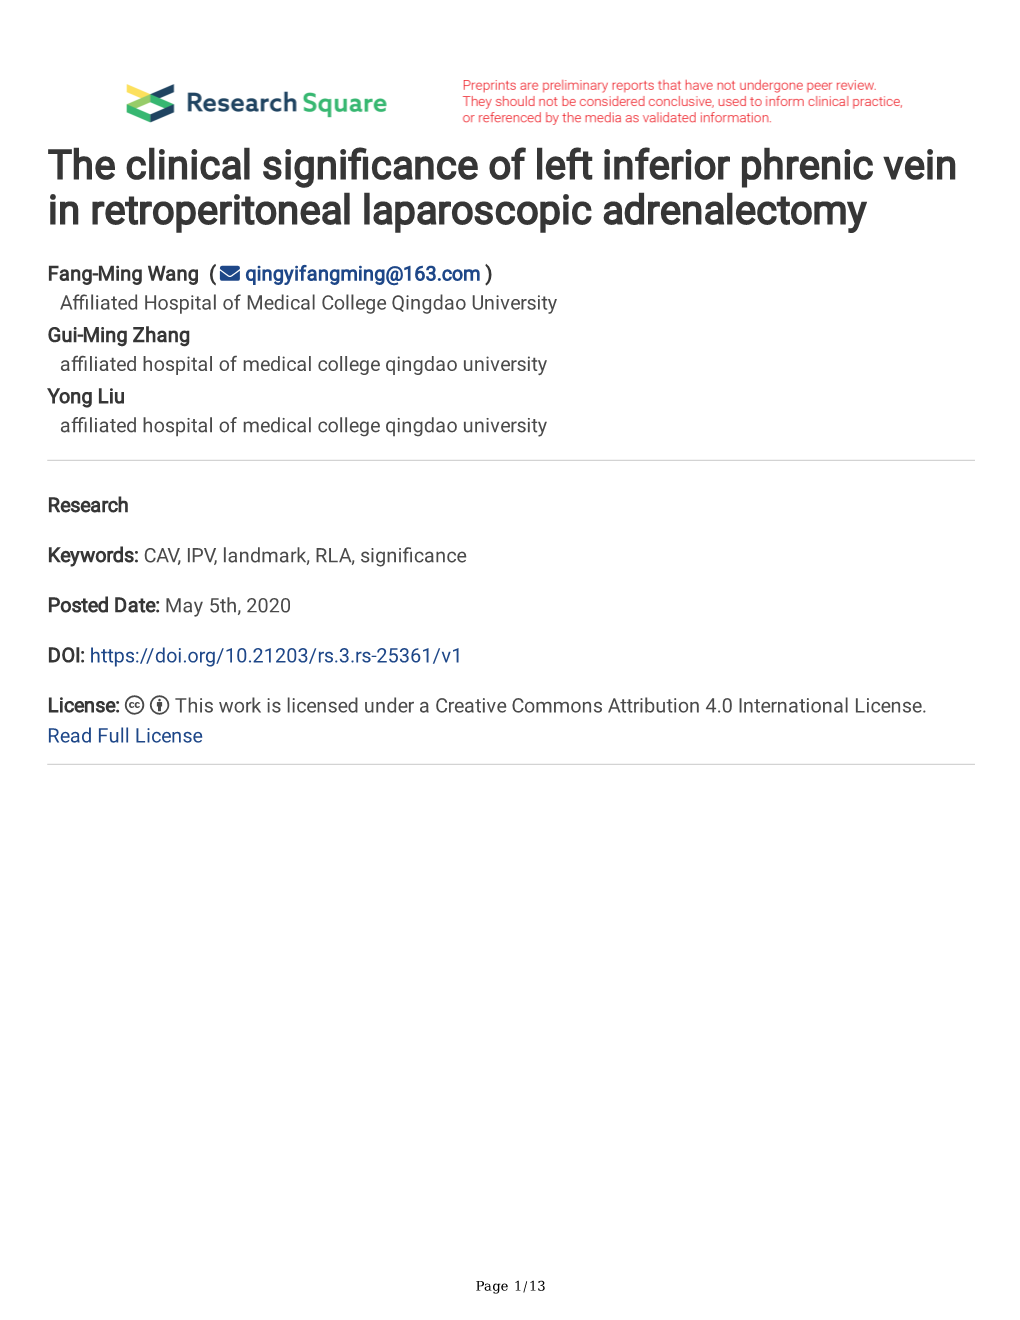 The Clinical Signi Cance of Left Inferior Phrenic Vein in Retroperitoneal